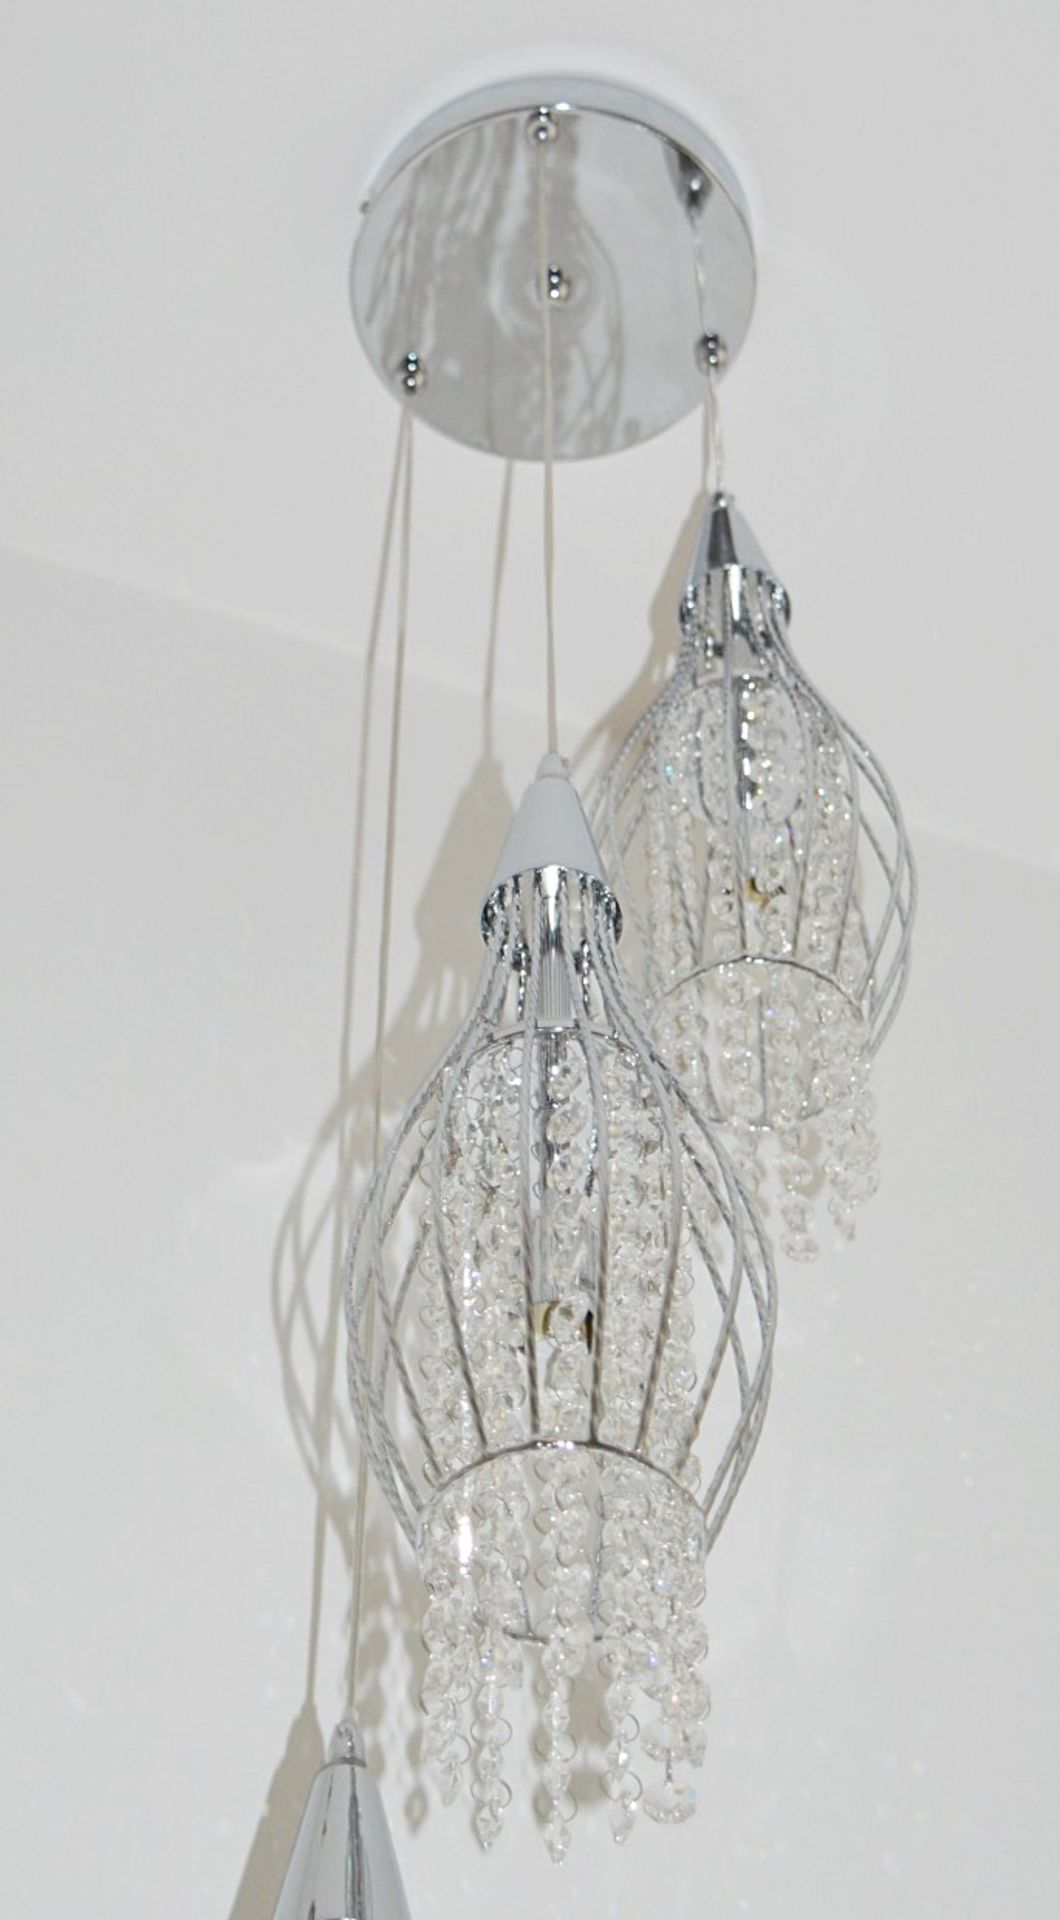 1 x Rocket Chrome 3-Light Cage Multi-drop Pendant Light With Clear Crystal Buttons - RRP £228.00 - Image 4 of 4